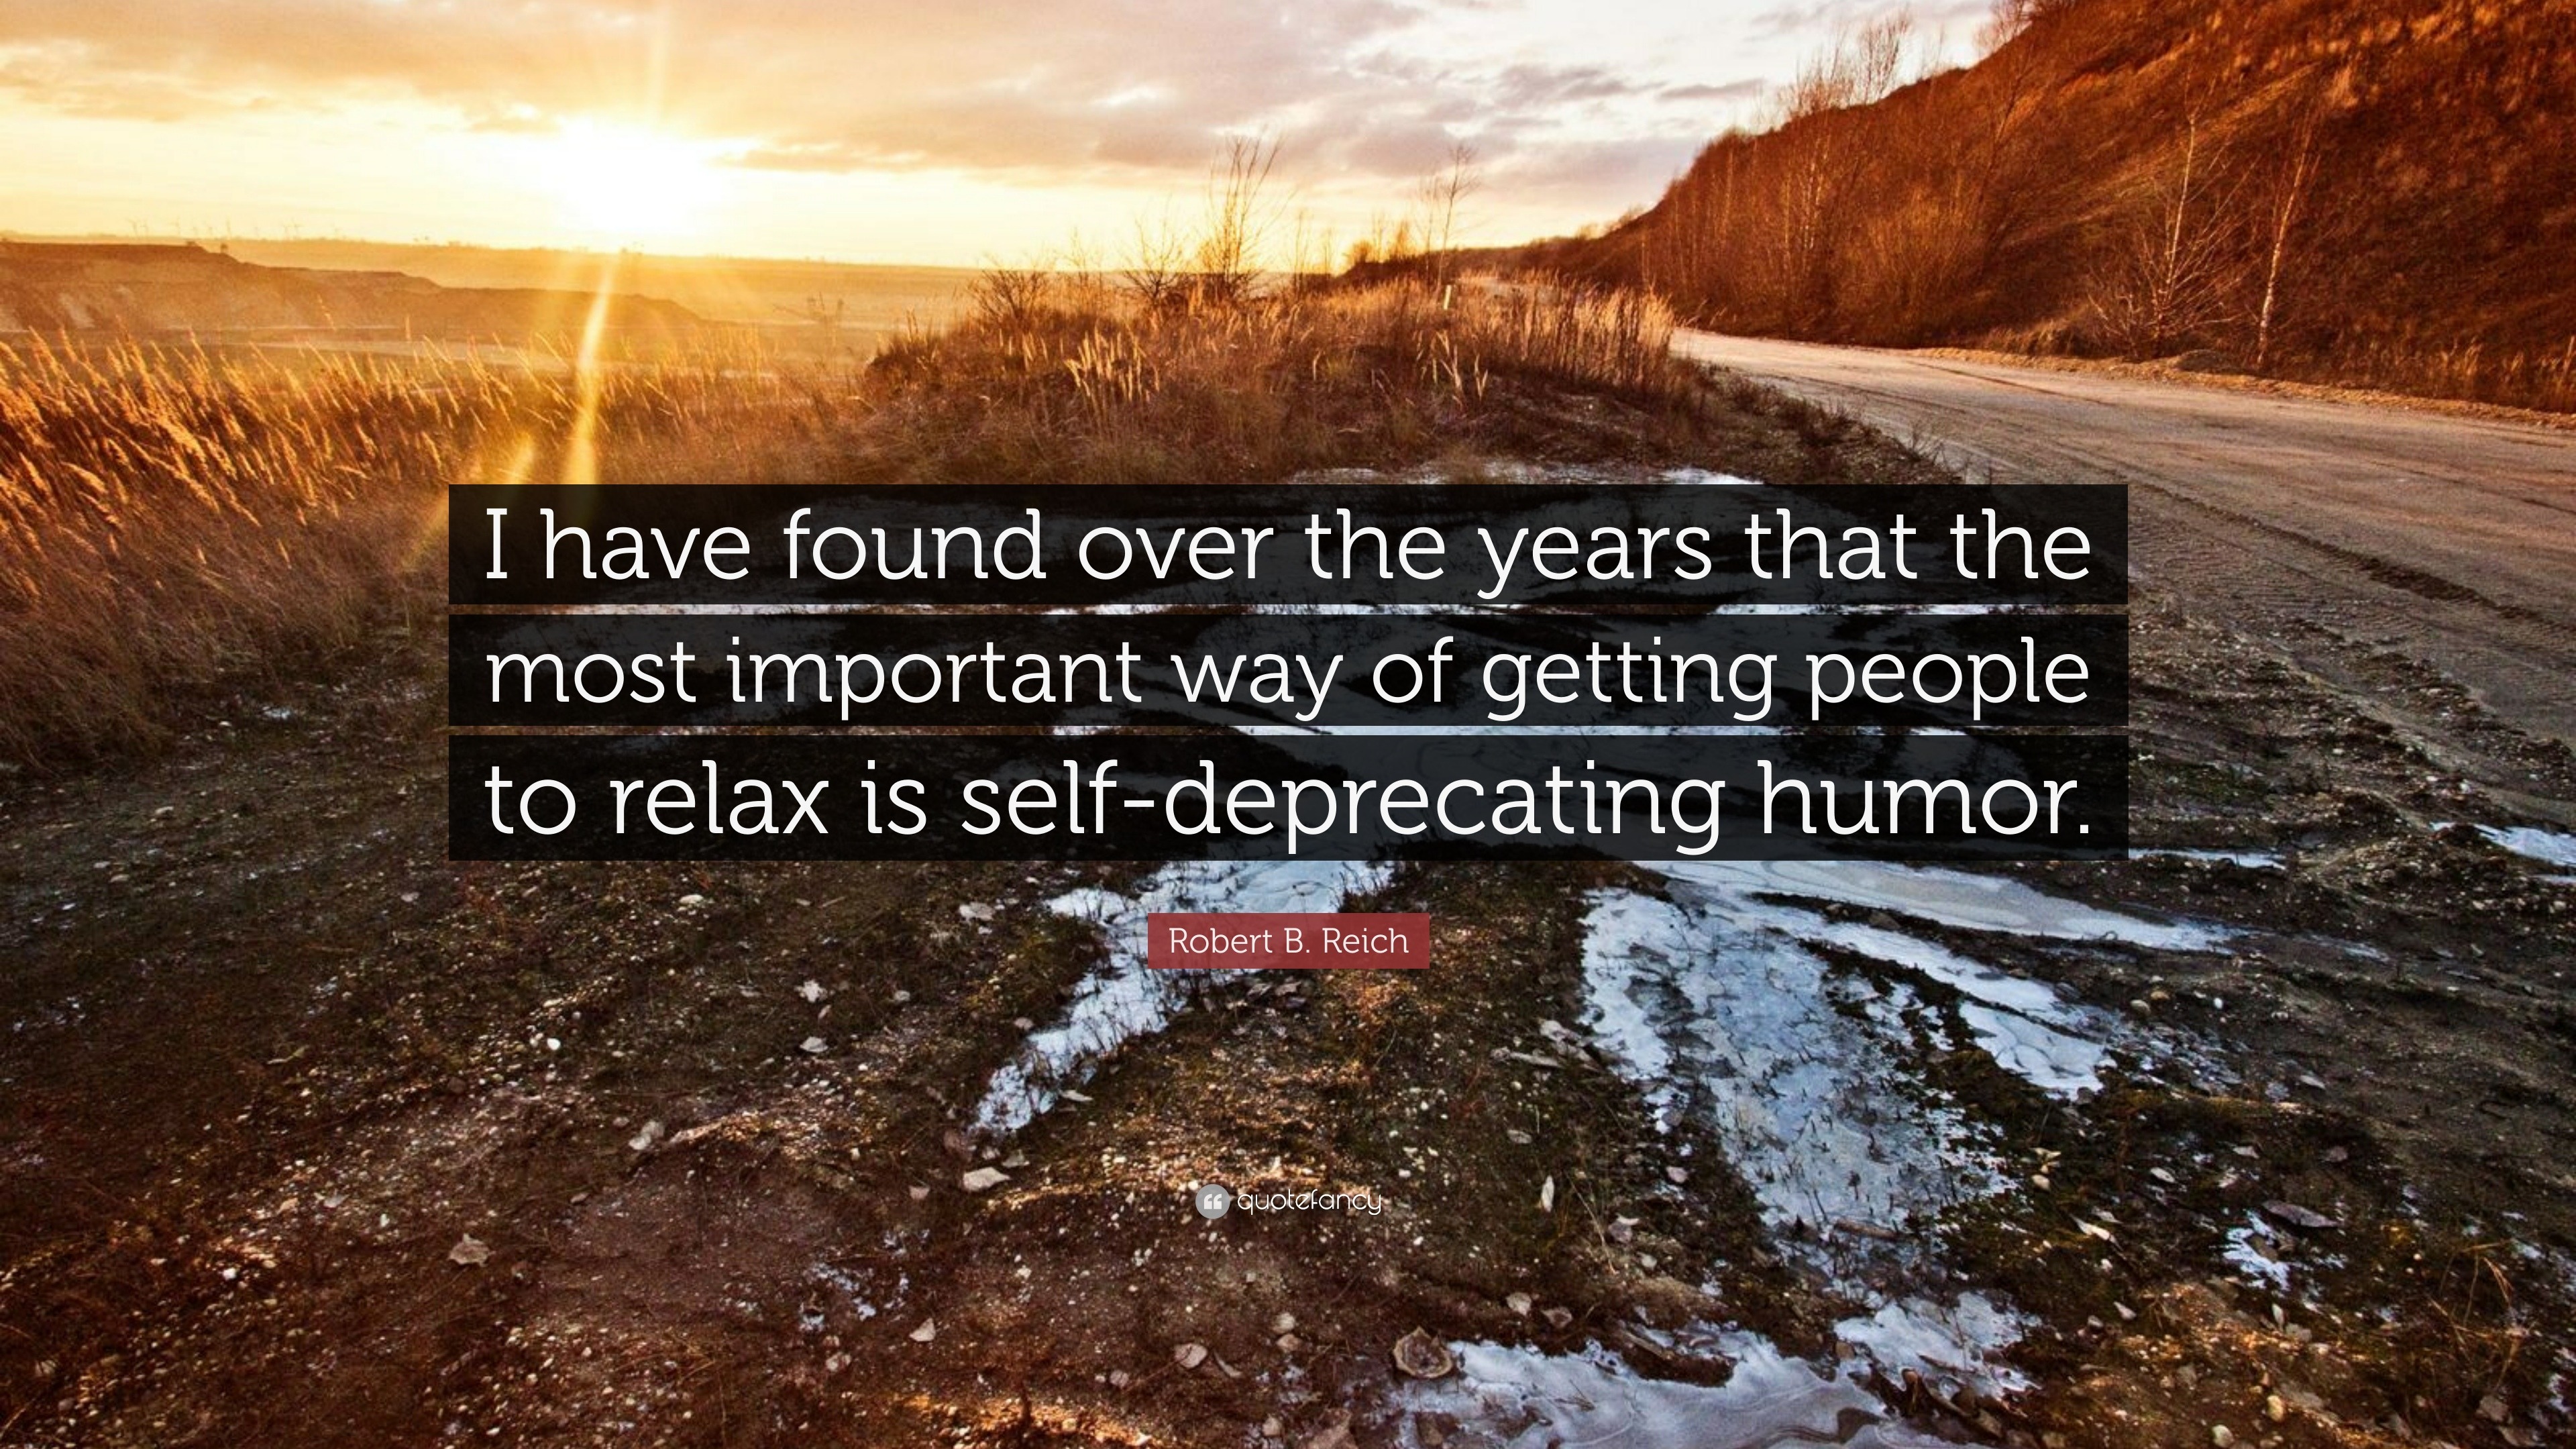 Robert B. Reich Quote: "I have found over the years that ...